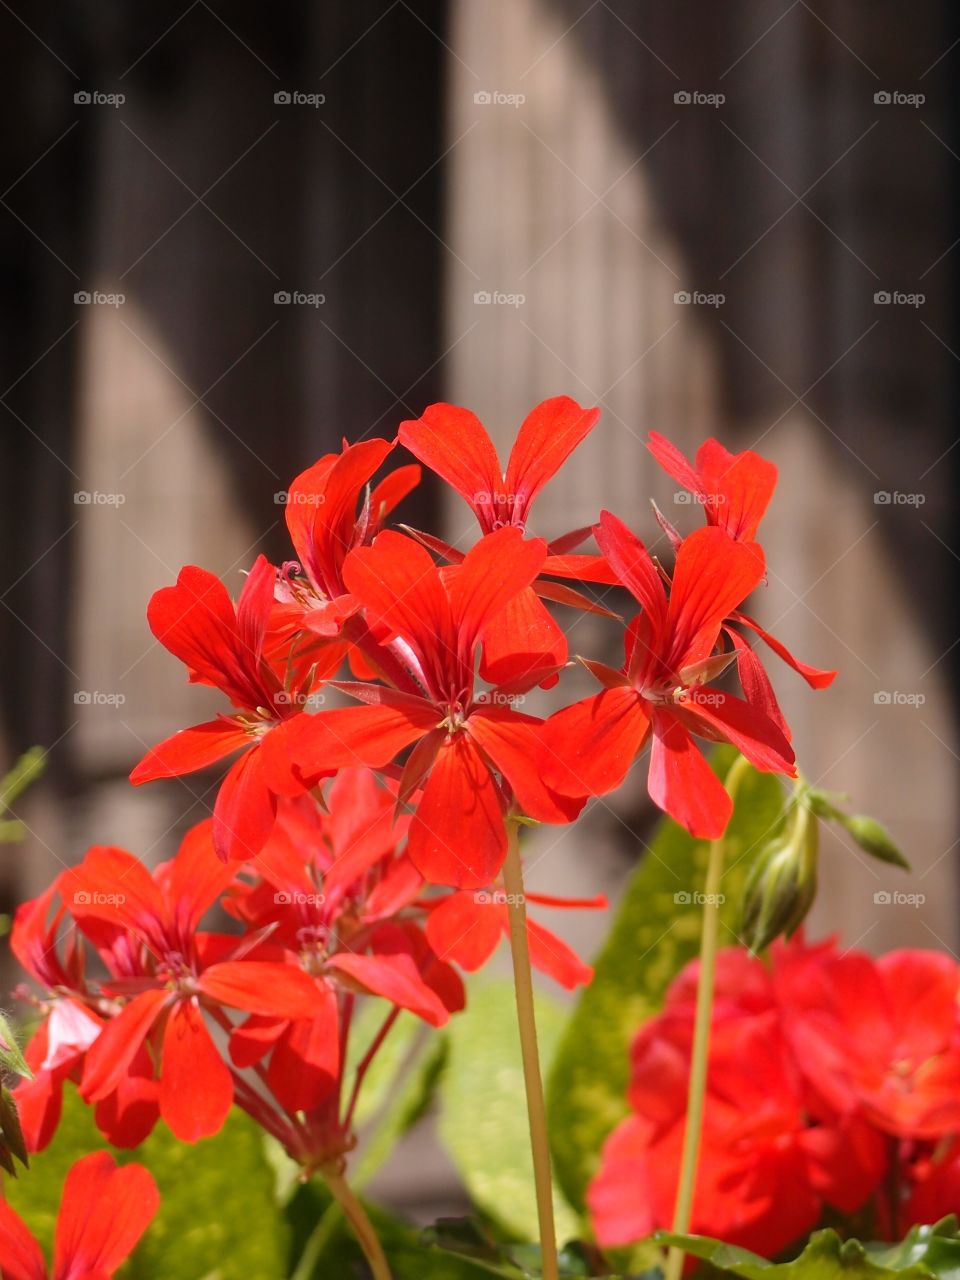 Brilliant red flowers on a decorative fence with an old European stone building in the background on a sunny summer day. 